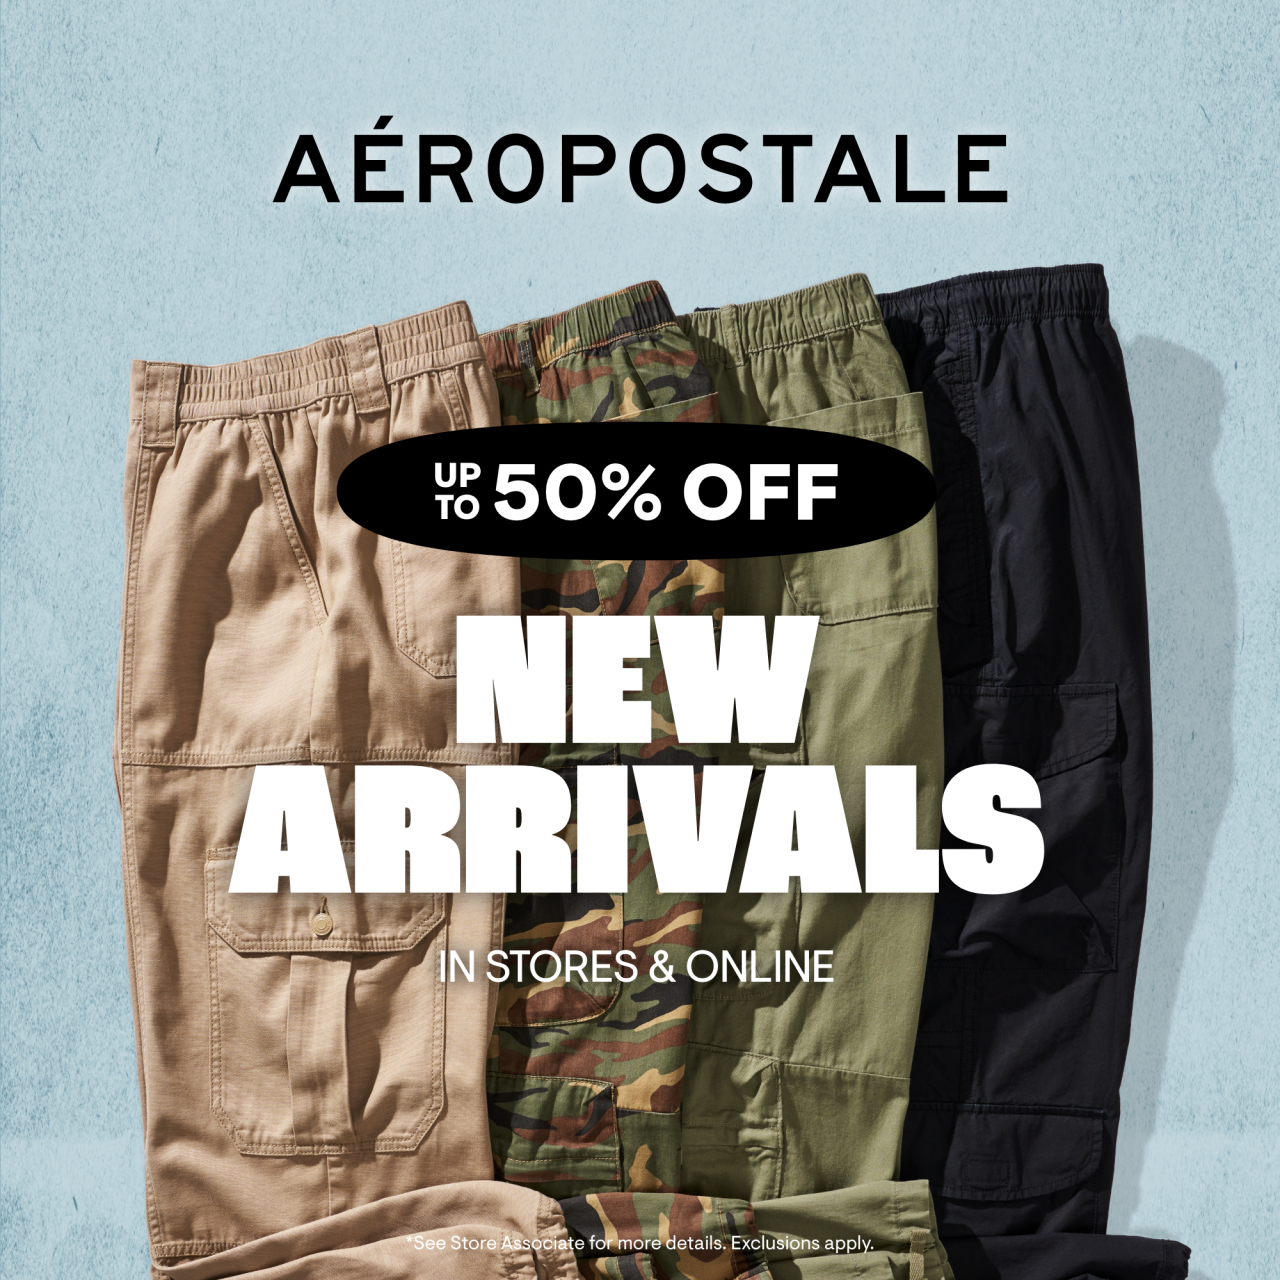 Aeropostale Campaign 169 Up To 50 Off New Arrivals EN 1280x1280 1